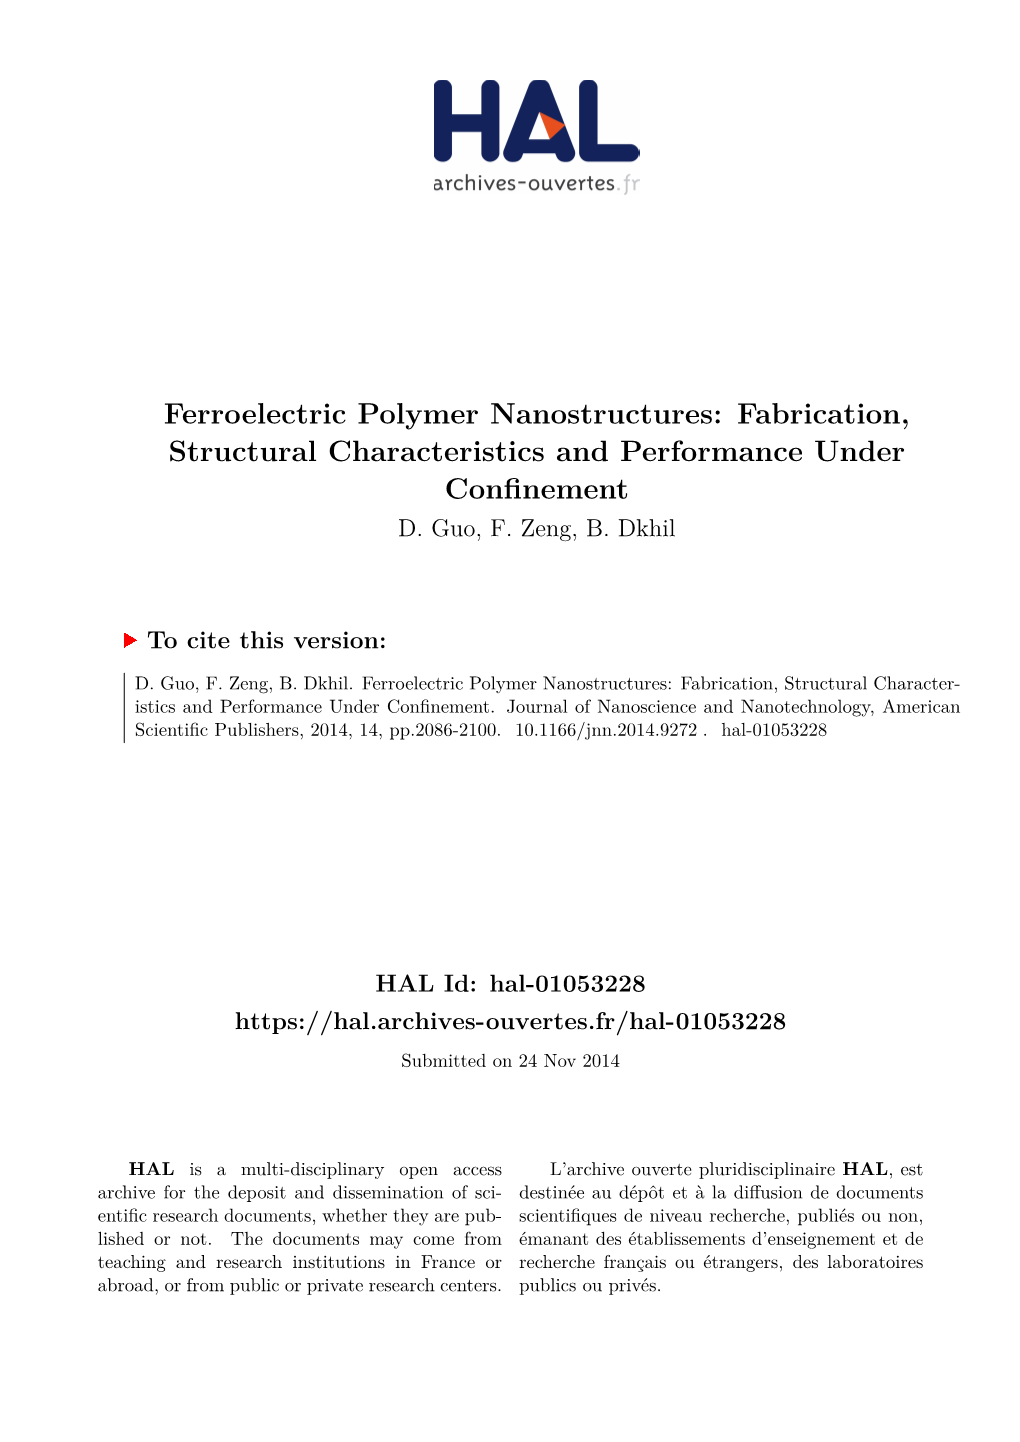 Ferroelectric Polymer Nanostructures: Fabrication, Structural Characteristics and Performance Under Confinement D